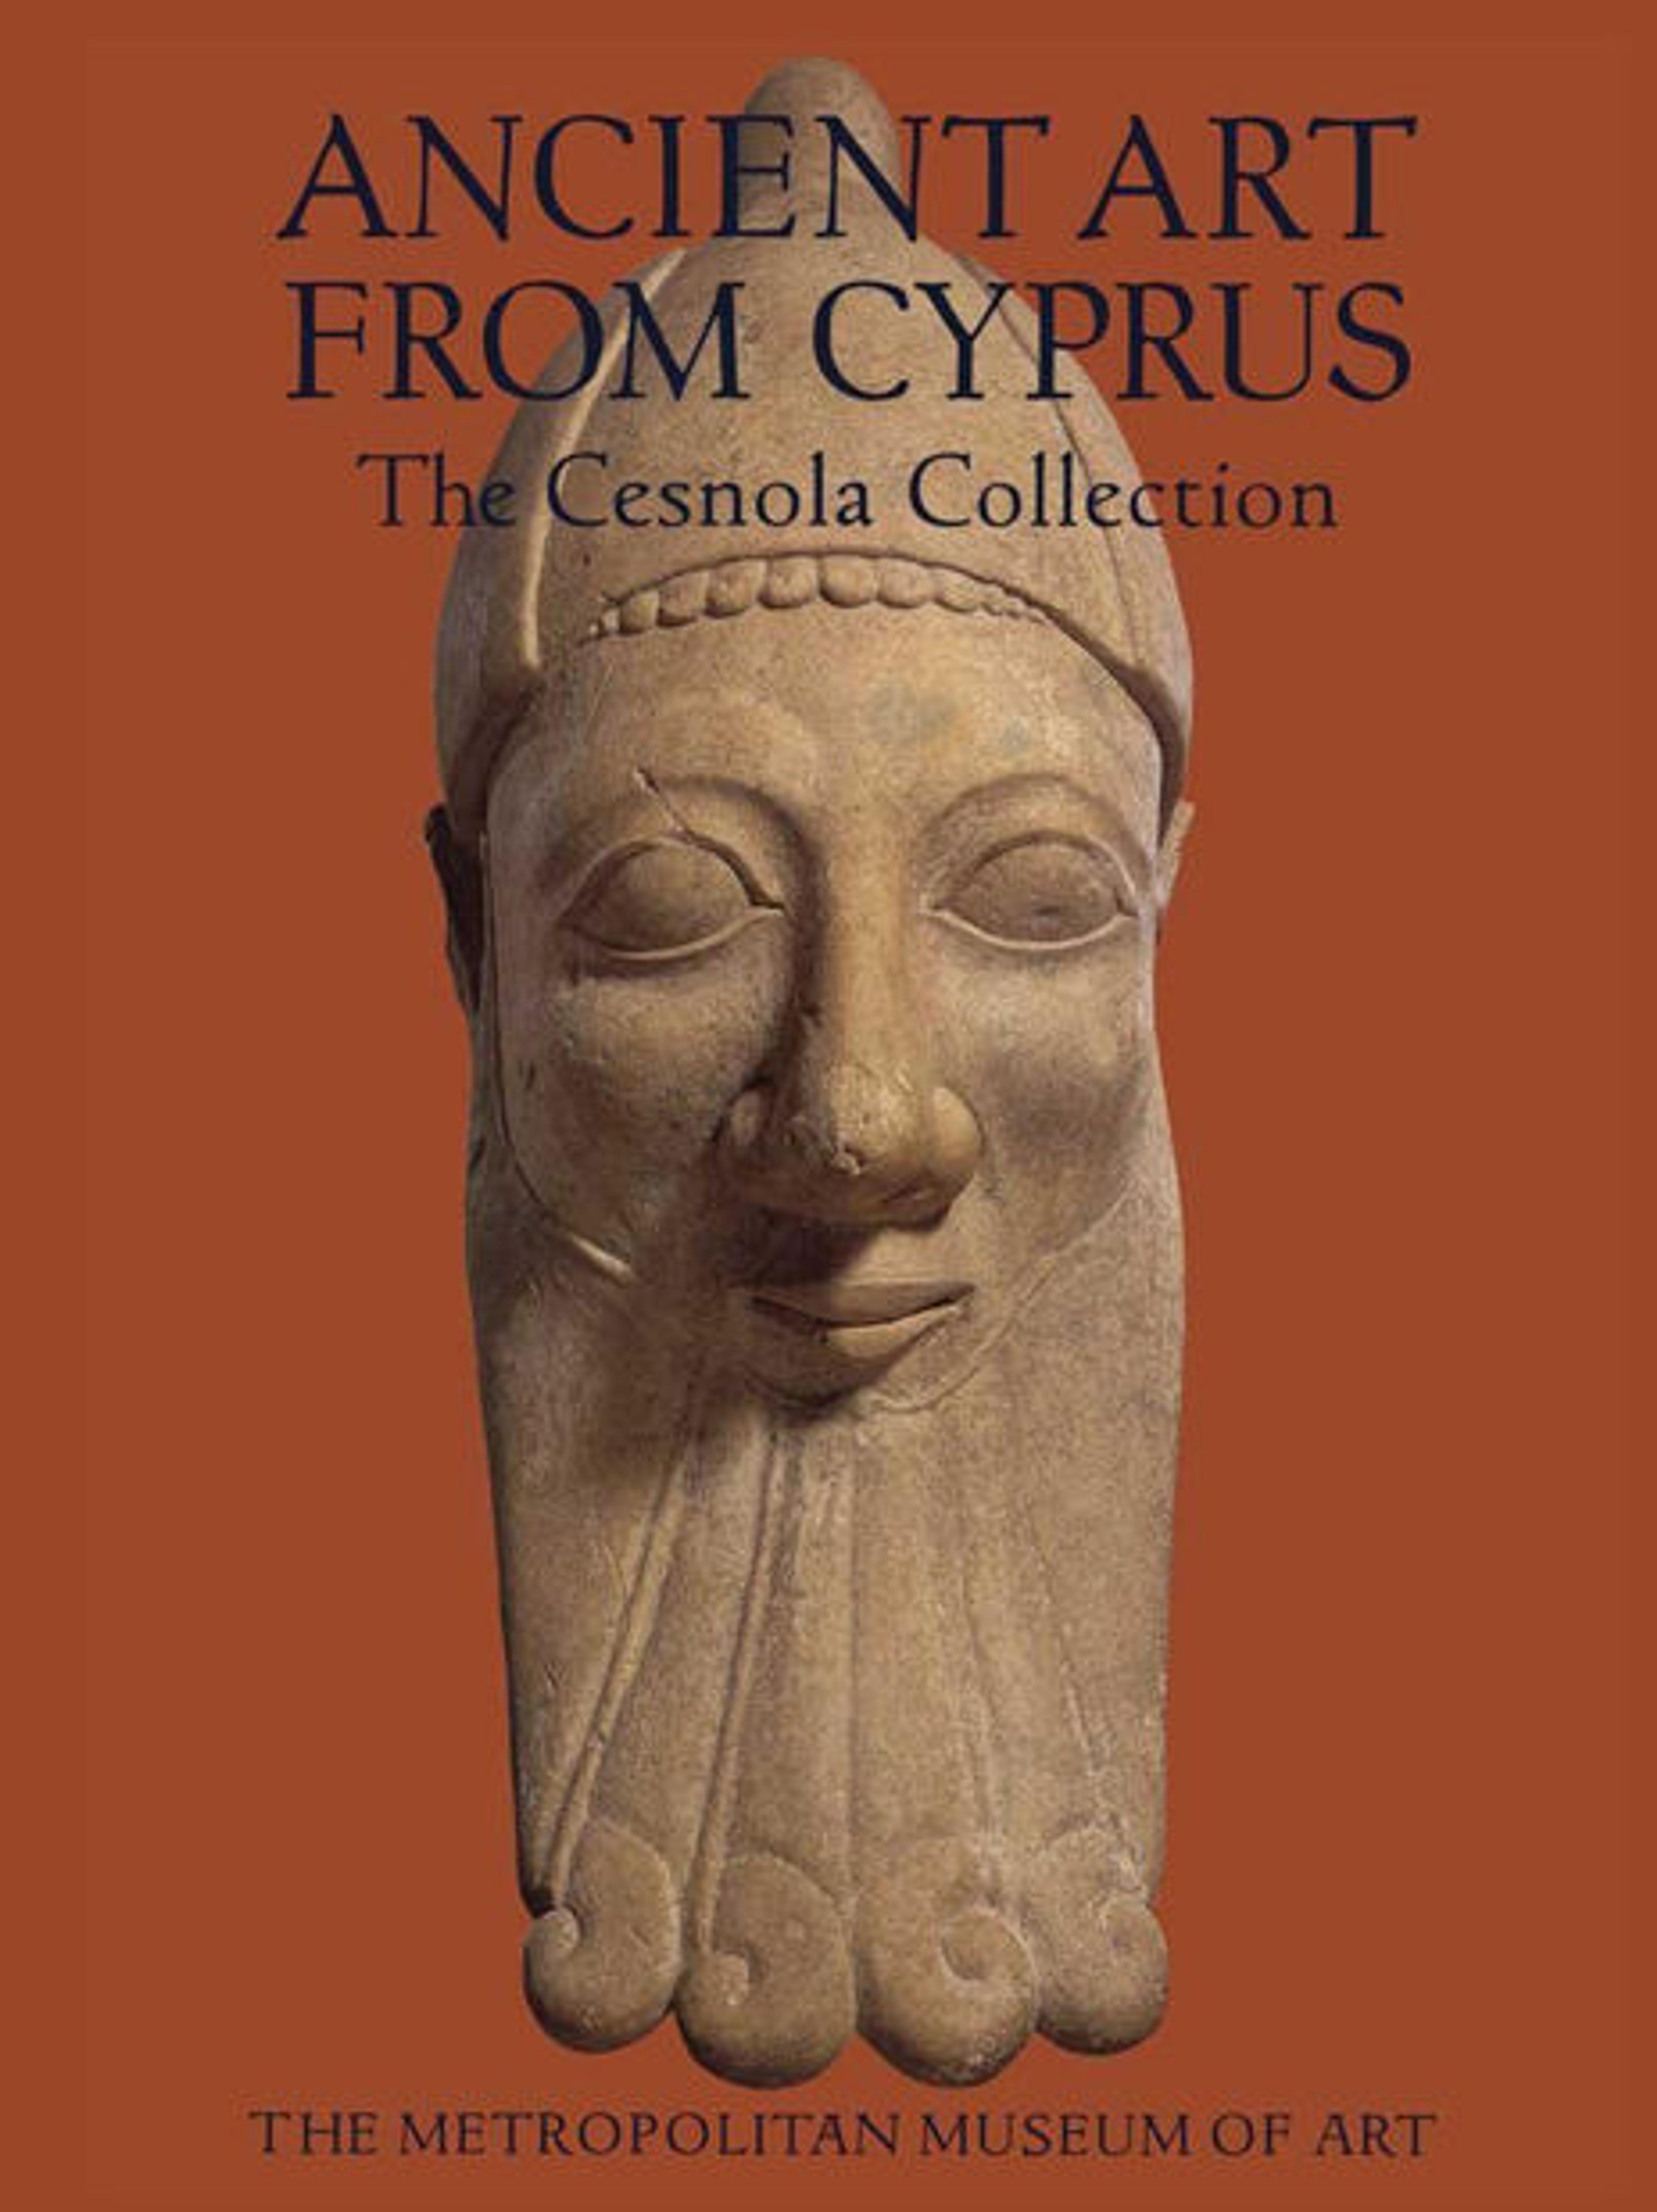 Cover of the 2000 catalogue Ancient Art from Cyprus: The Cesnola Collection in The Metropolitan Museum of Art